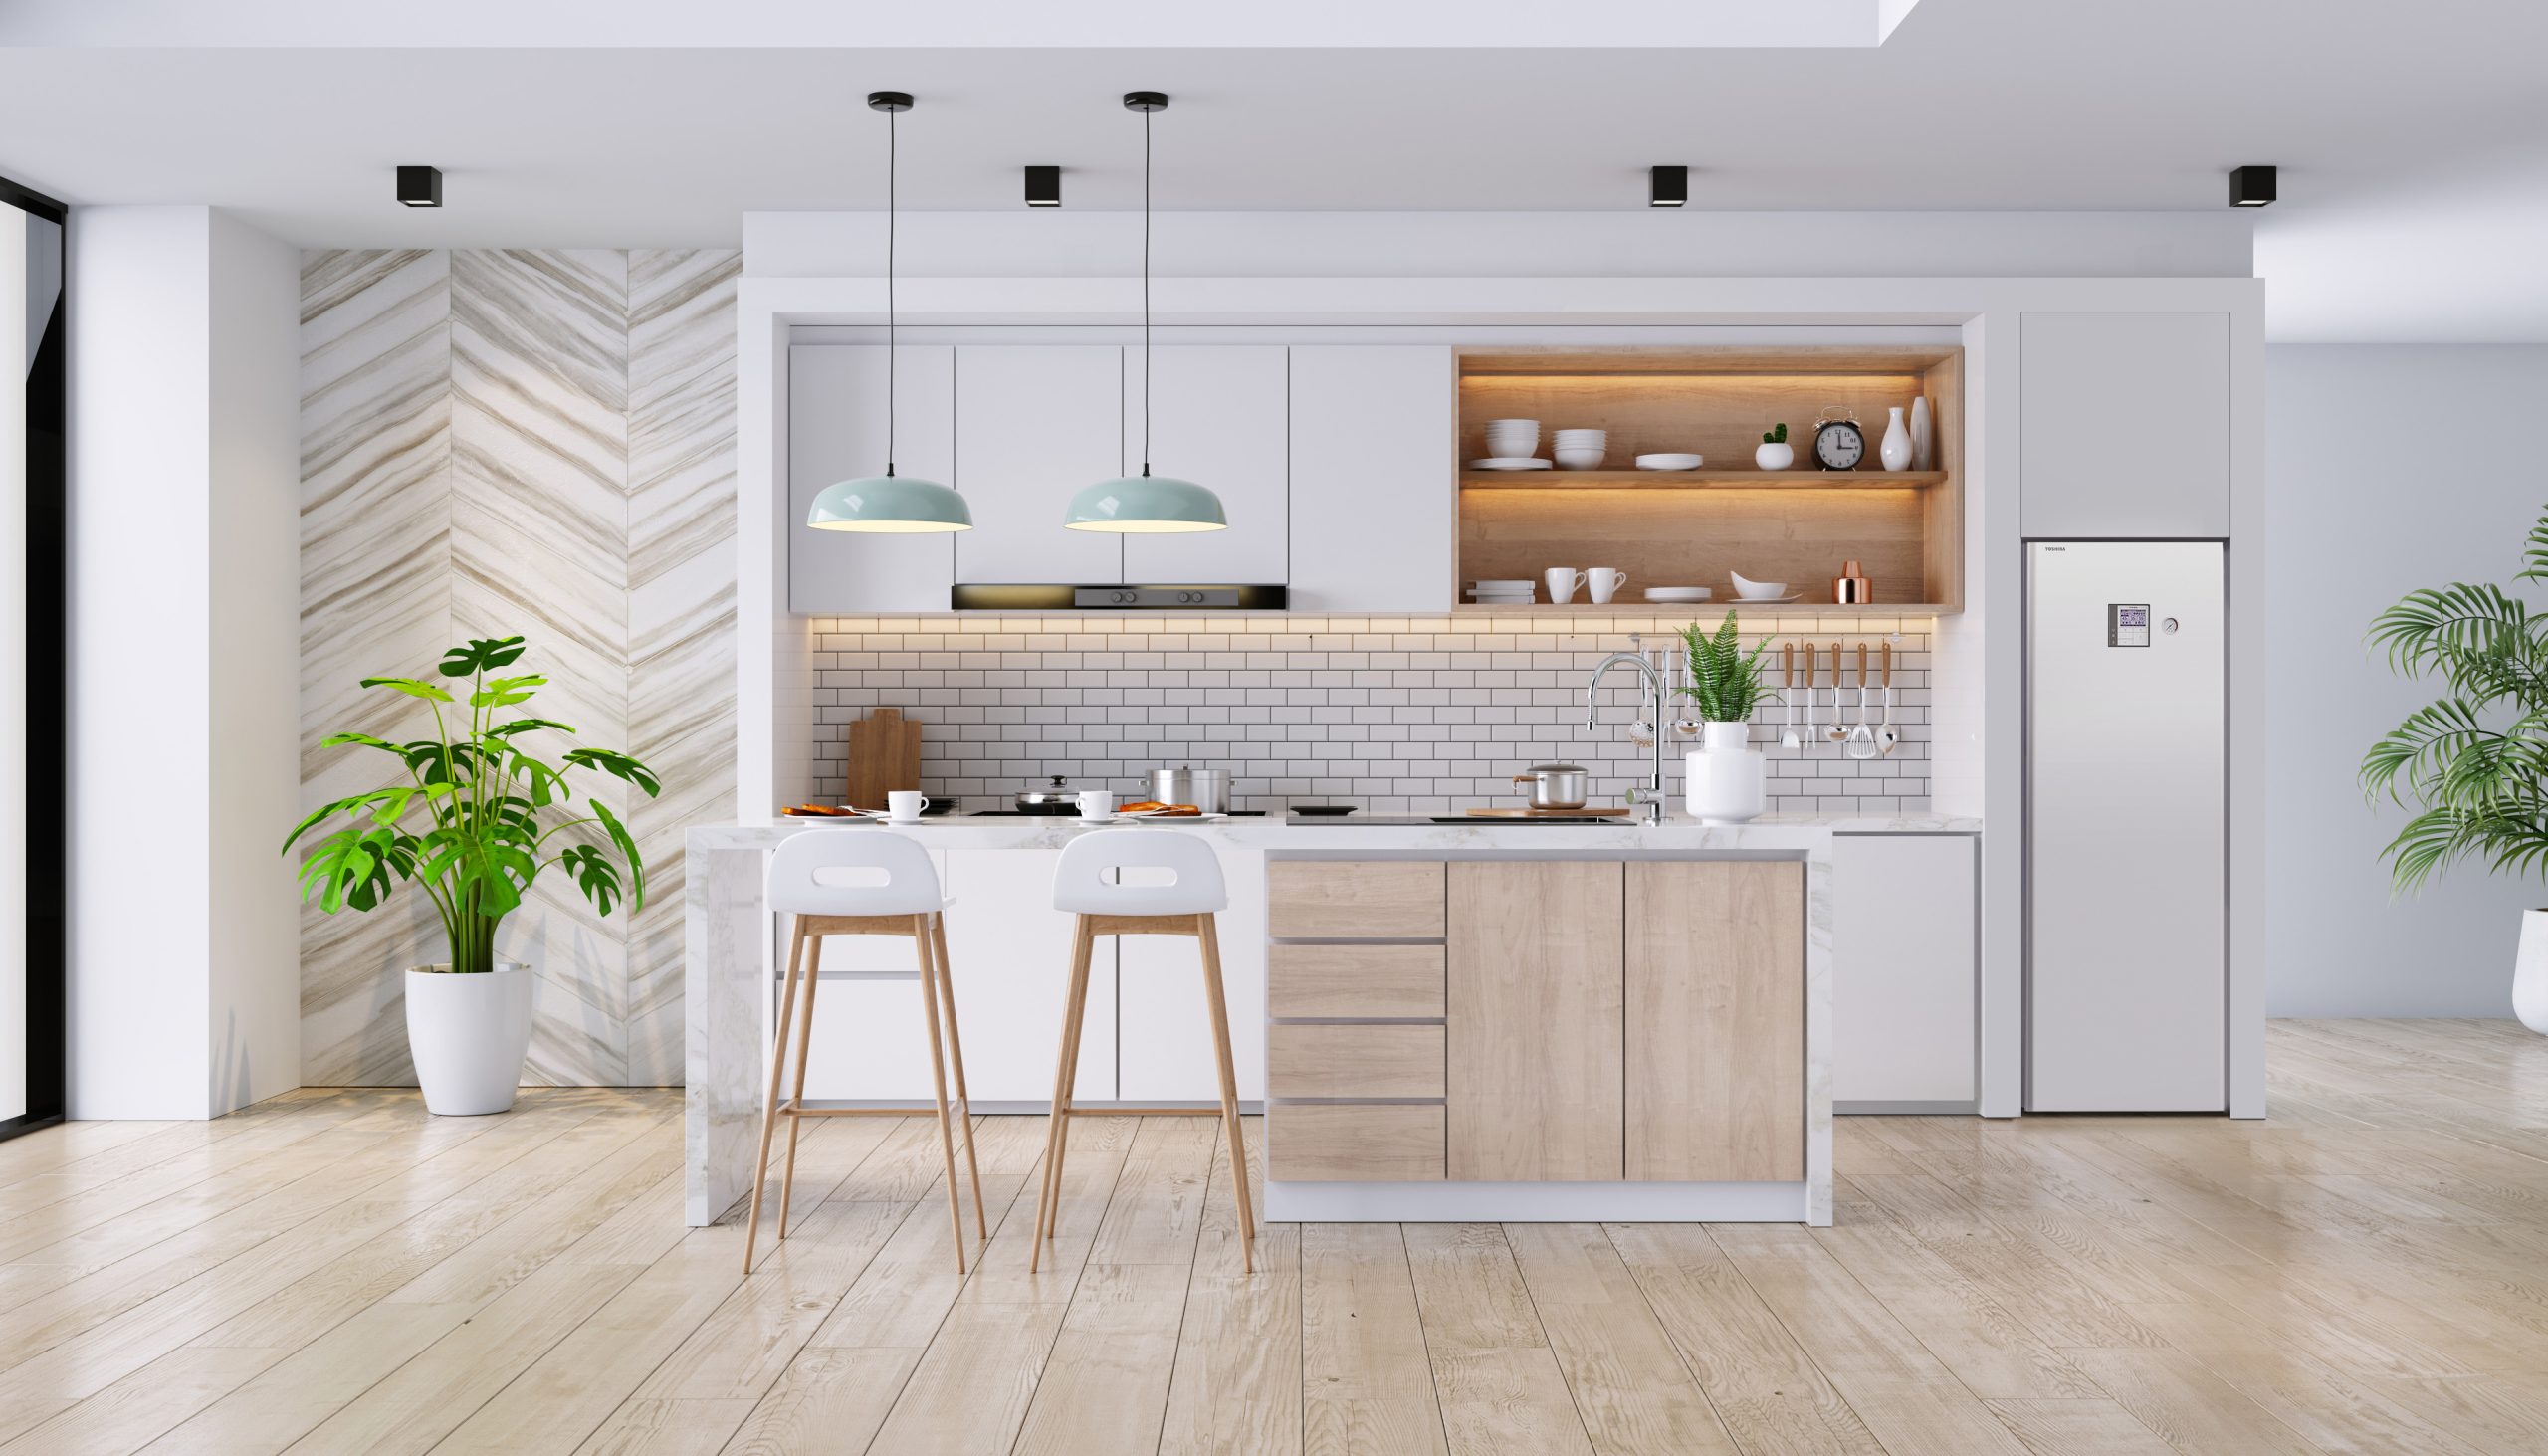 Modern Contemporary  kitchen room interior .white and wood material 3d render